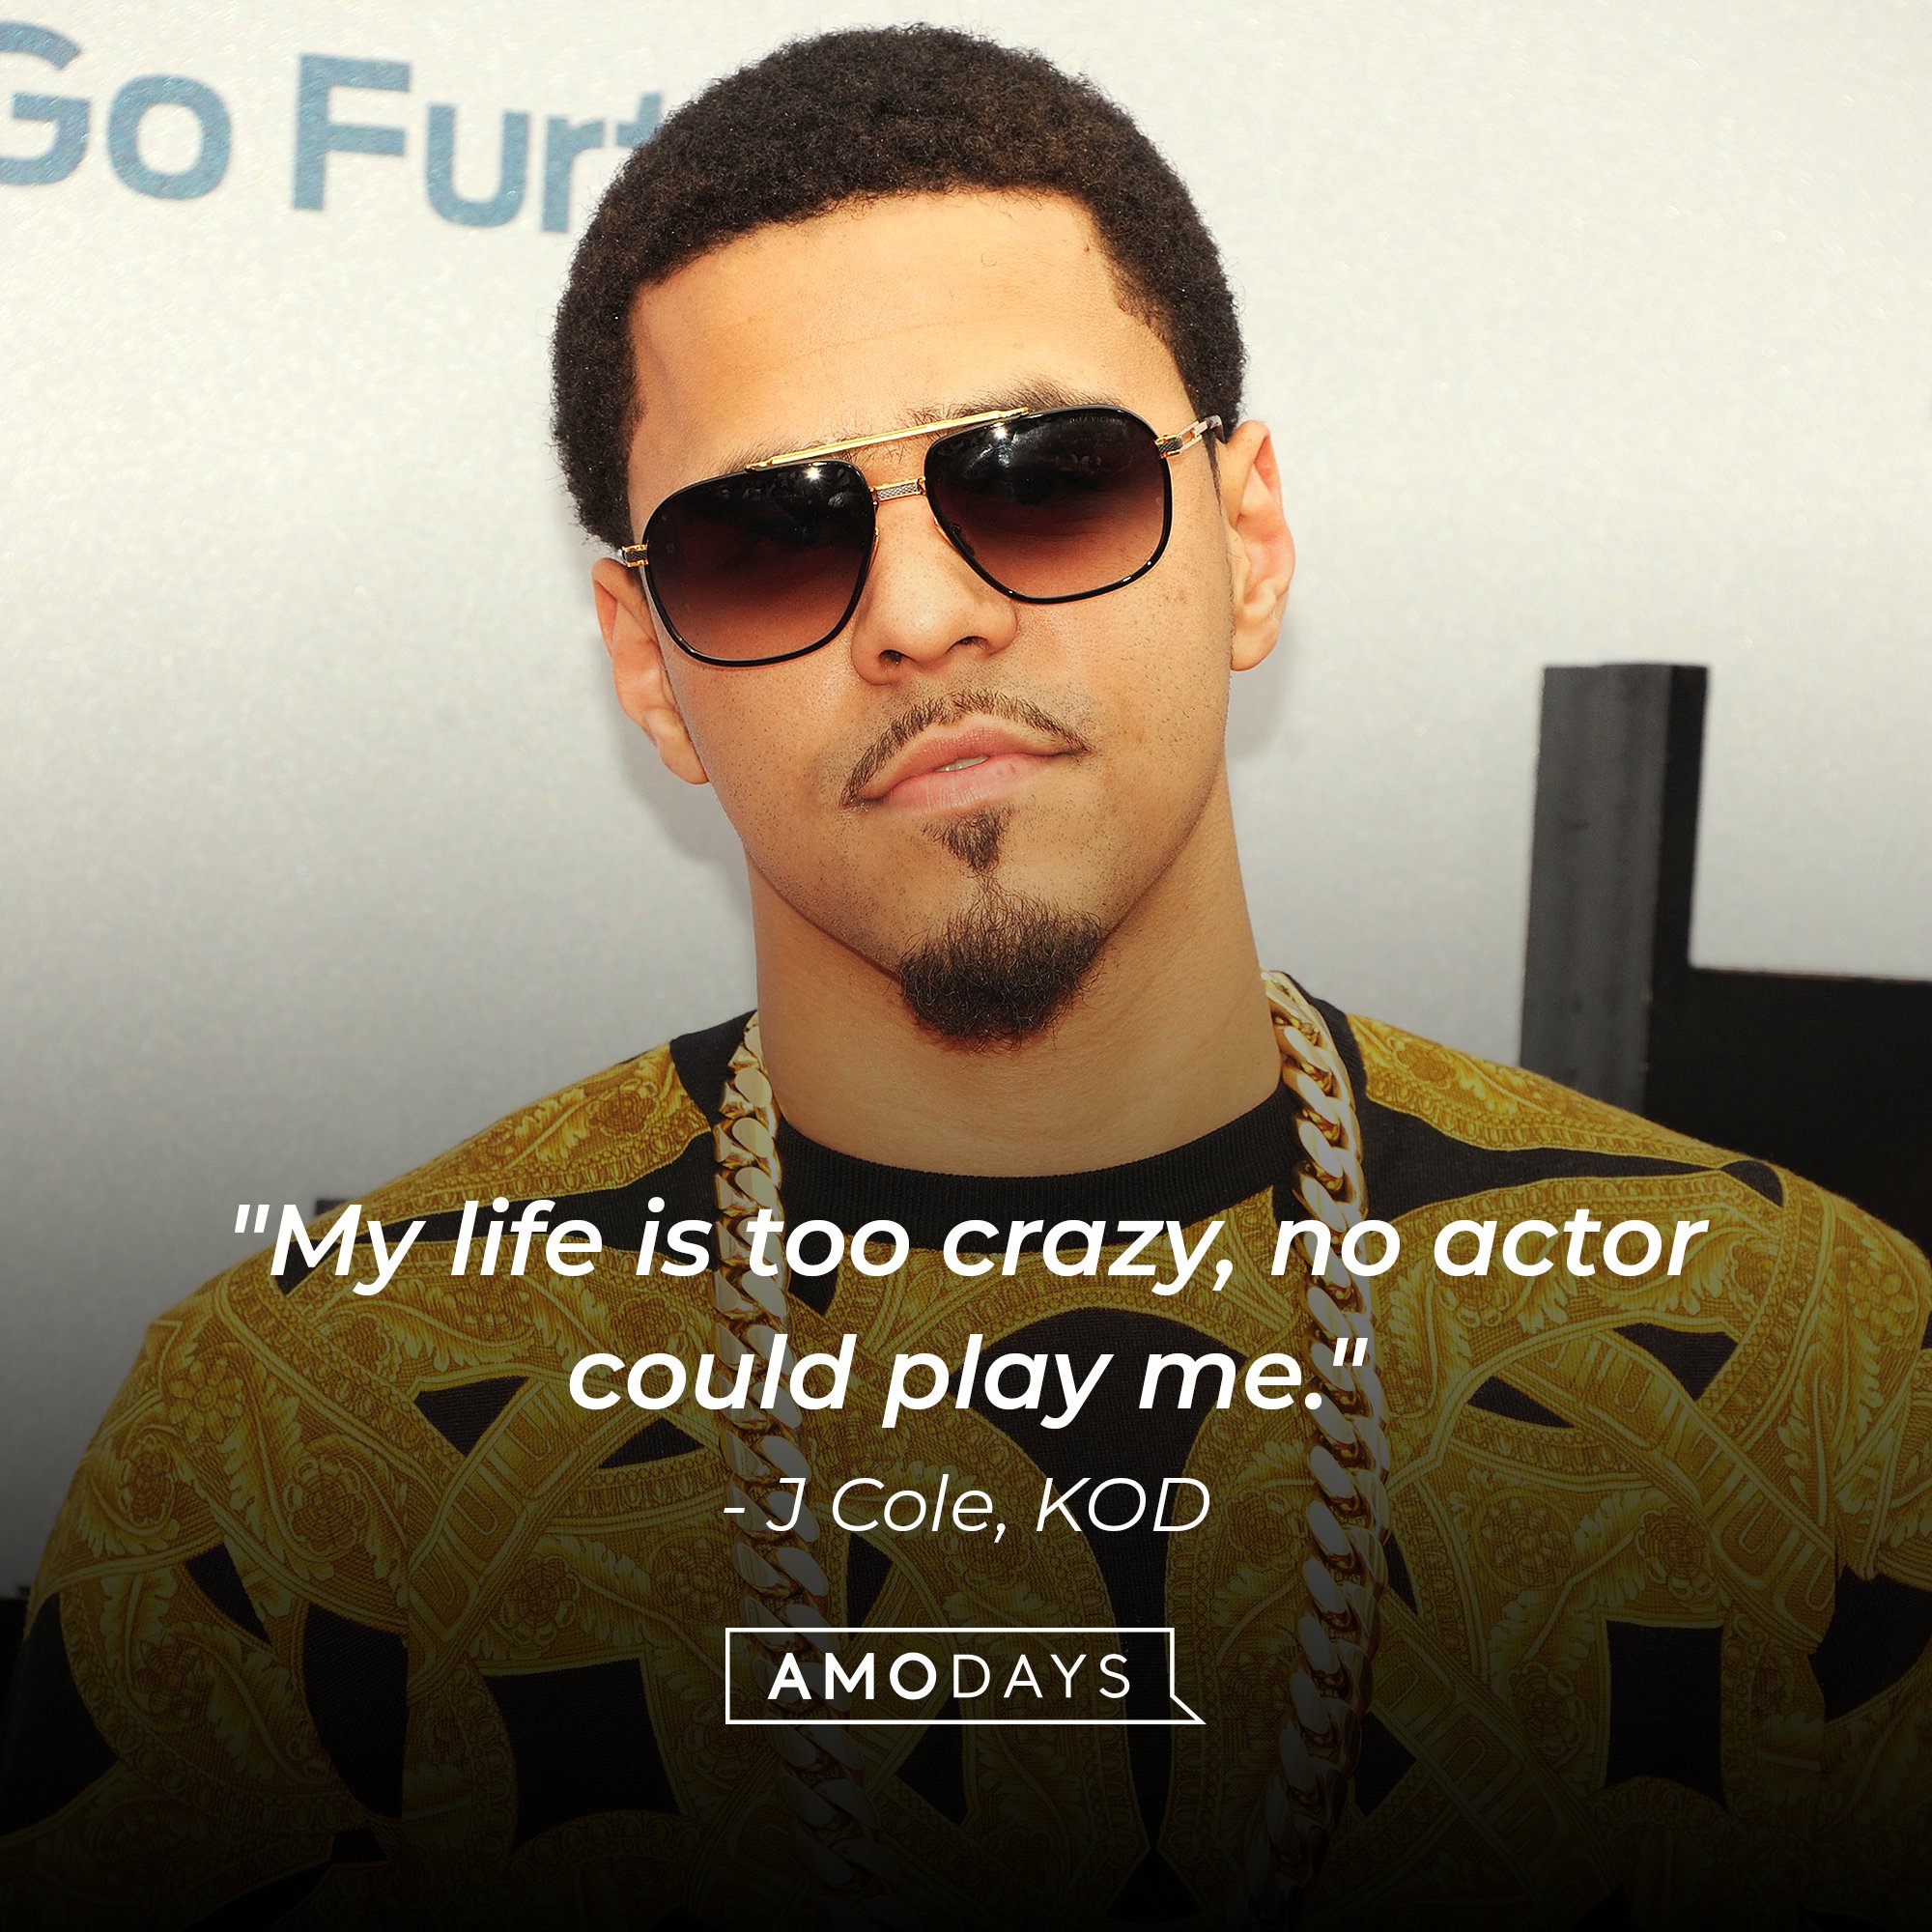 J Cole's quote: "My life is too crazy, no actor could play me." | Image: AmoDays